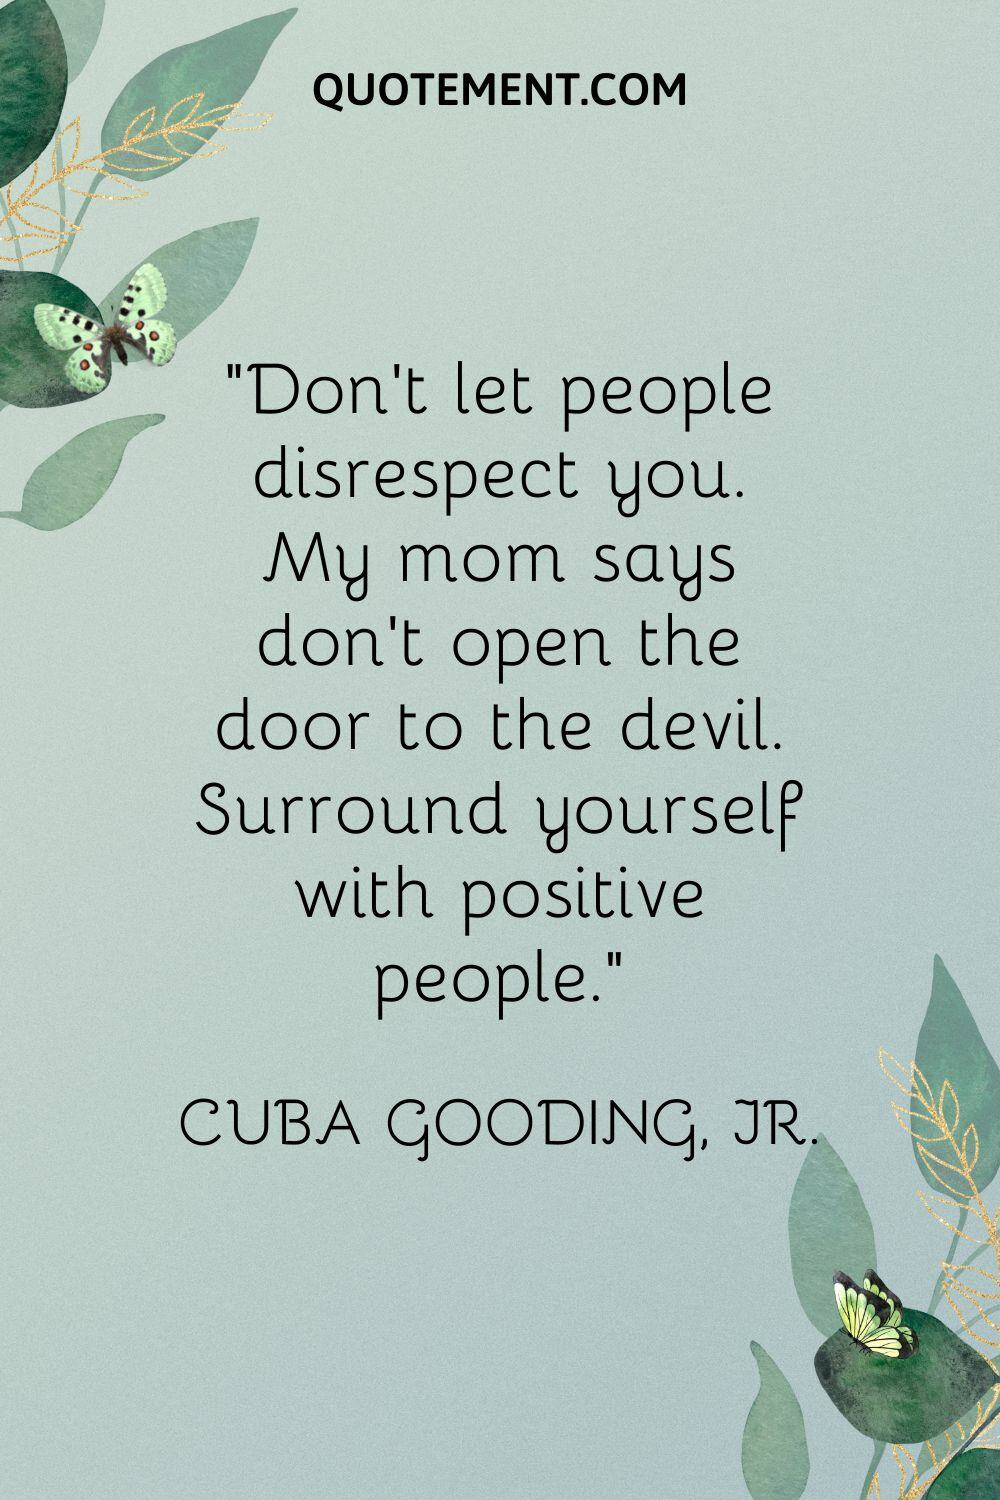 Don't let people disrespect you